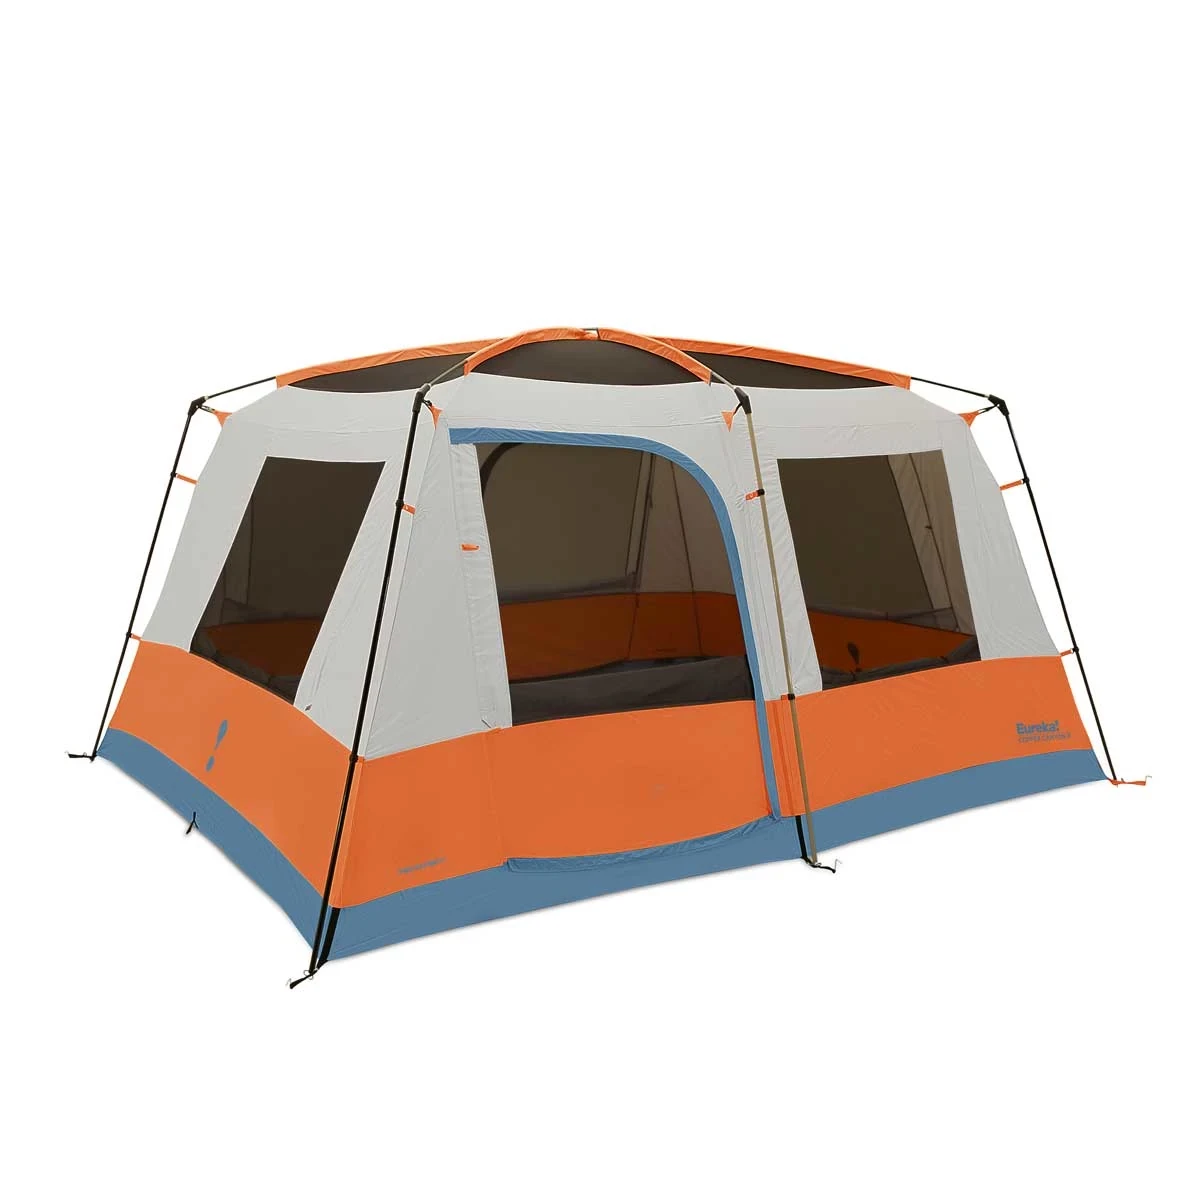 Copper Canyon LX 8 tent without rainfly windows open